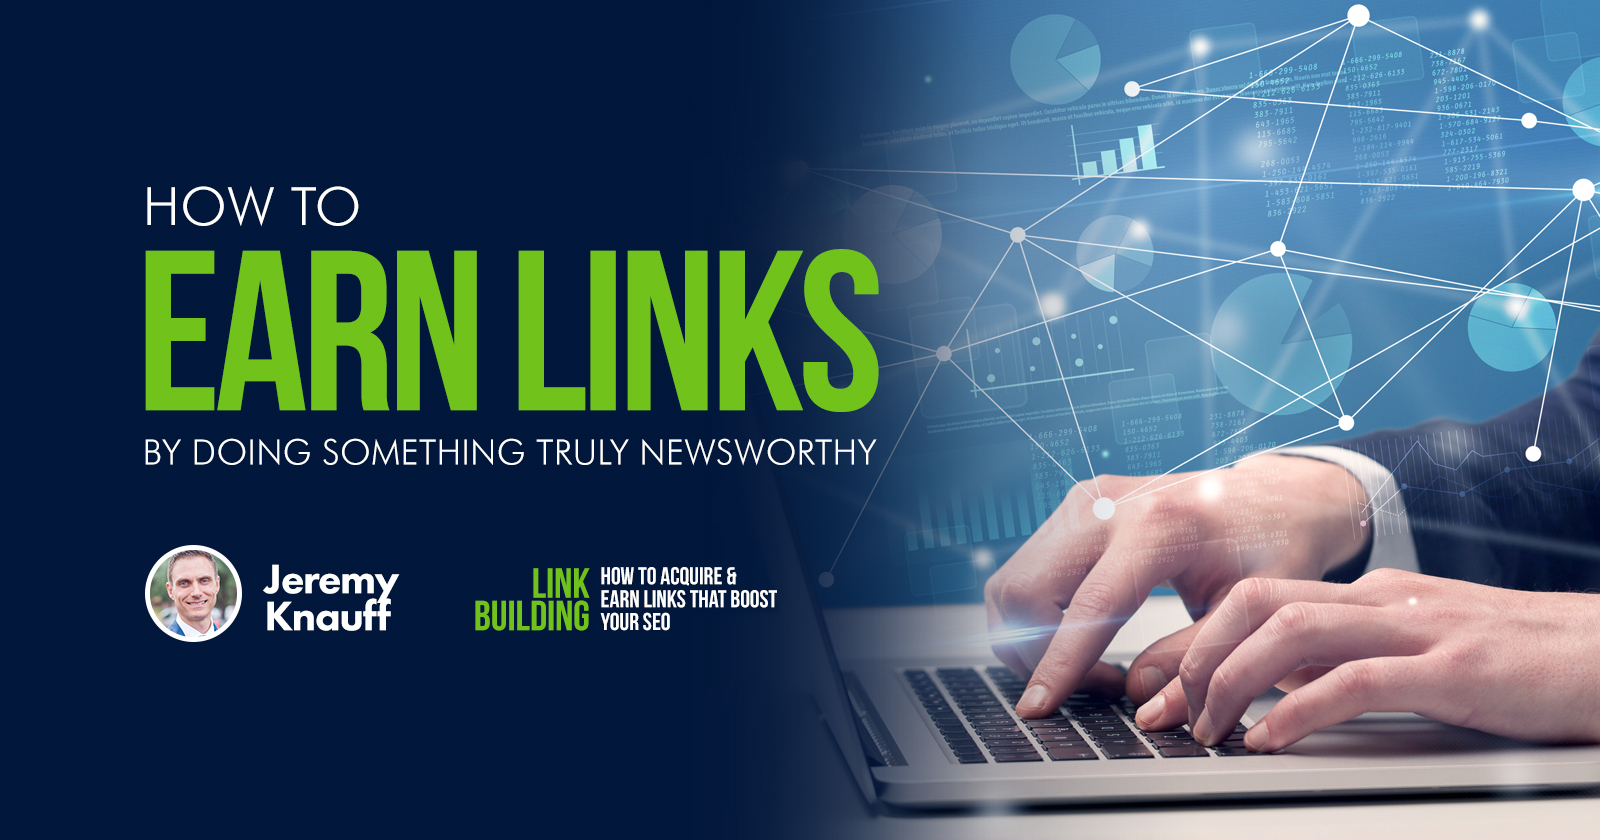 How to Earn Links by Doing Something Truly Newsworthy